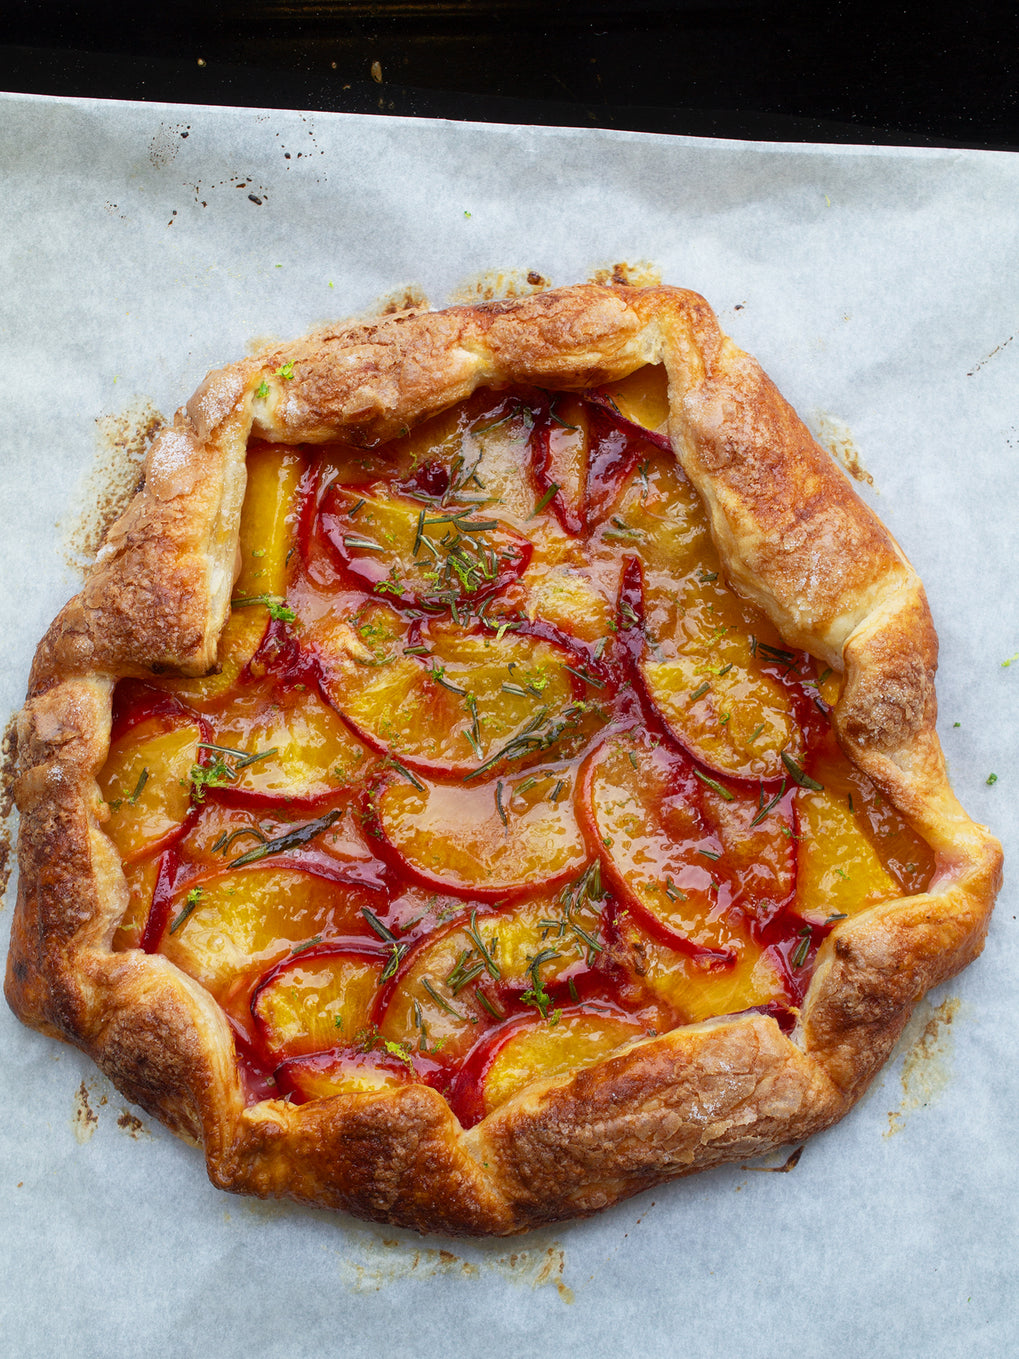 Peach, rosemary and lime galette